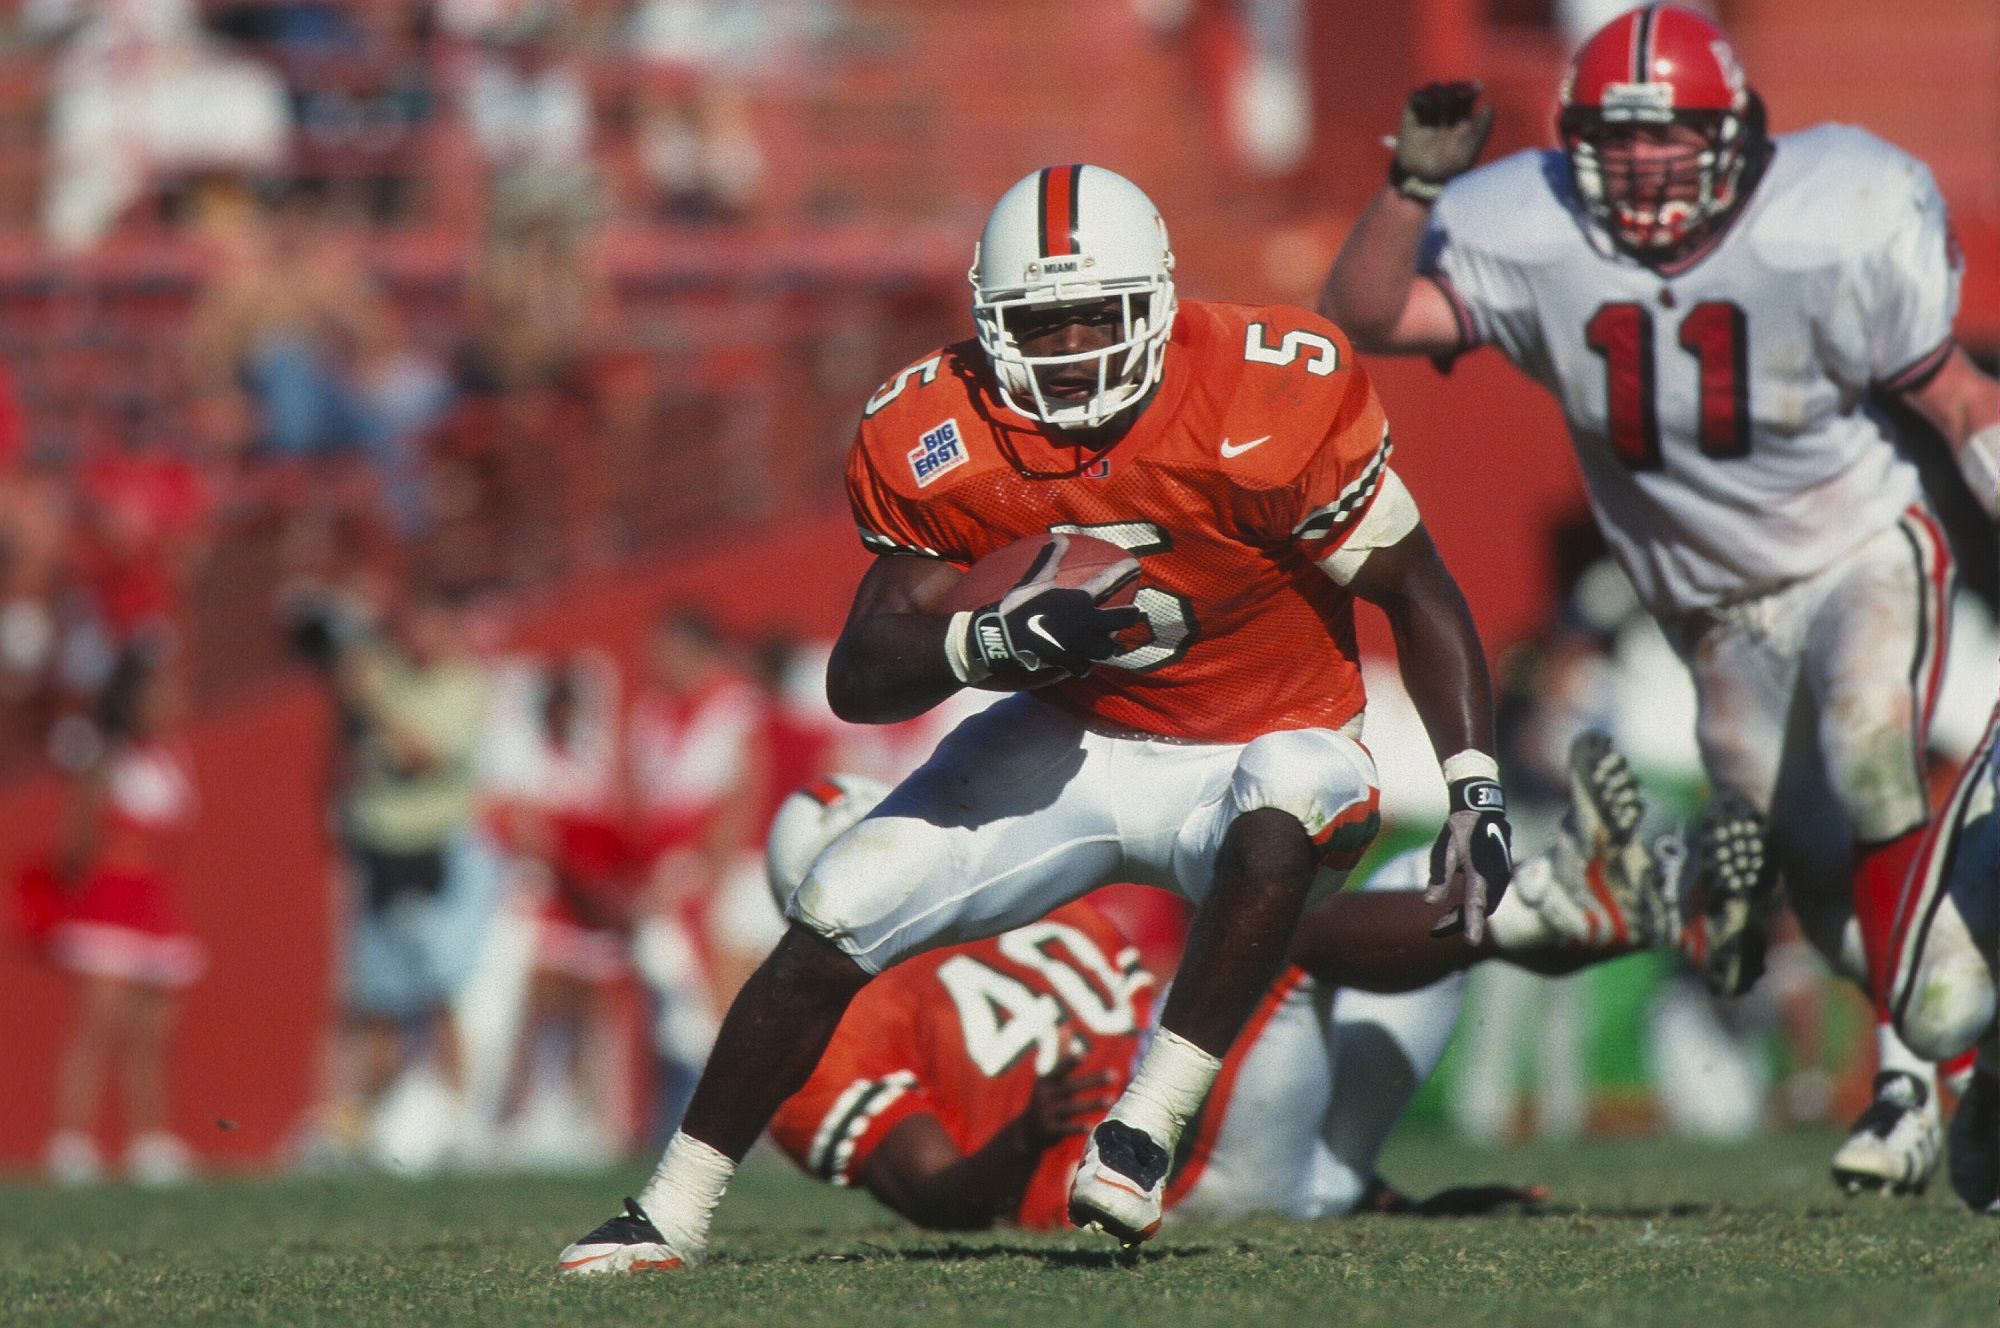 Miami Hurricanes Football: 2017 Ring of Honor inductees announced